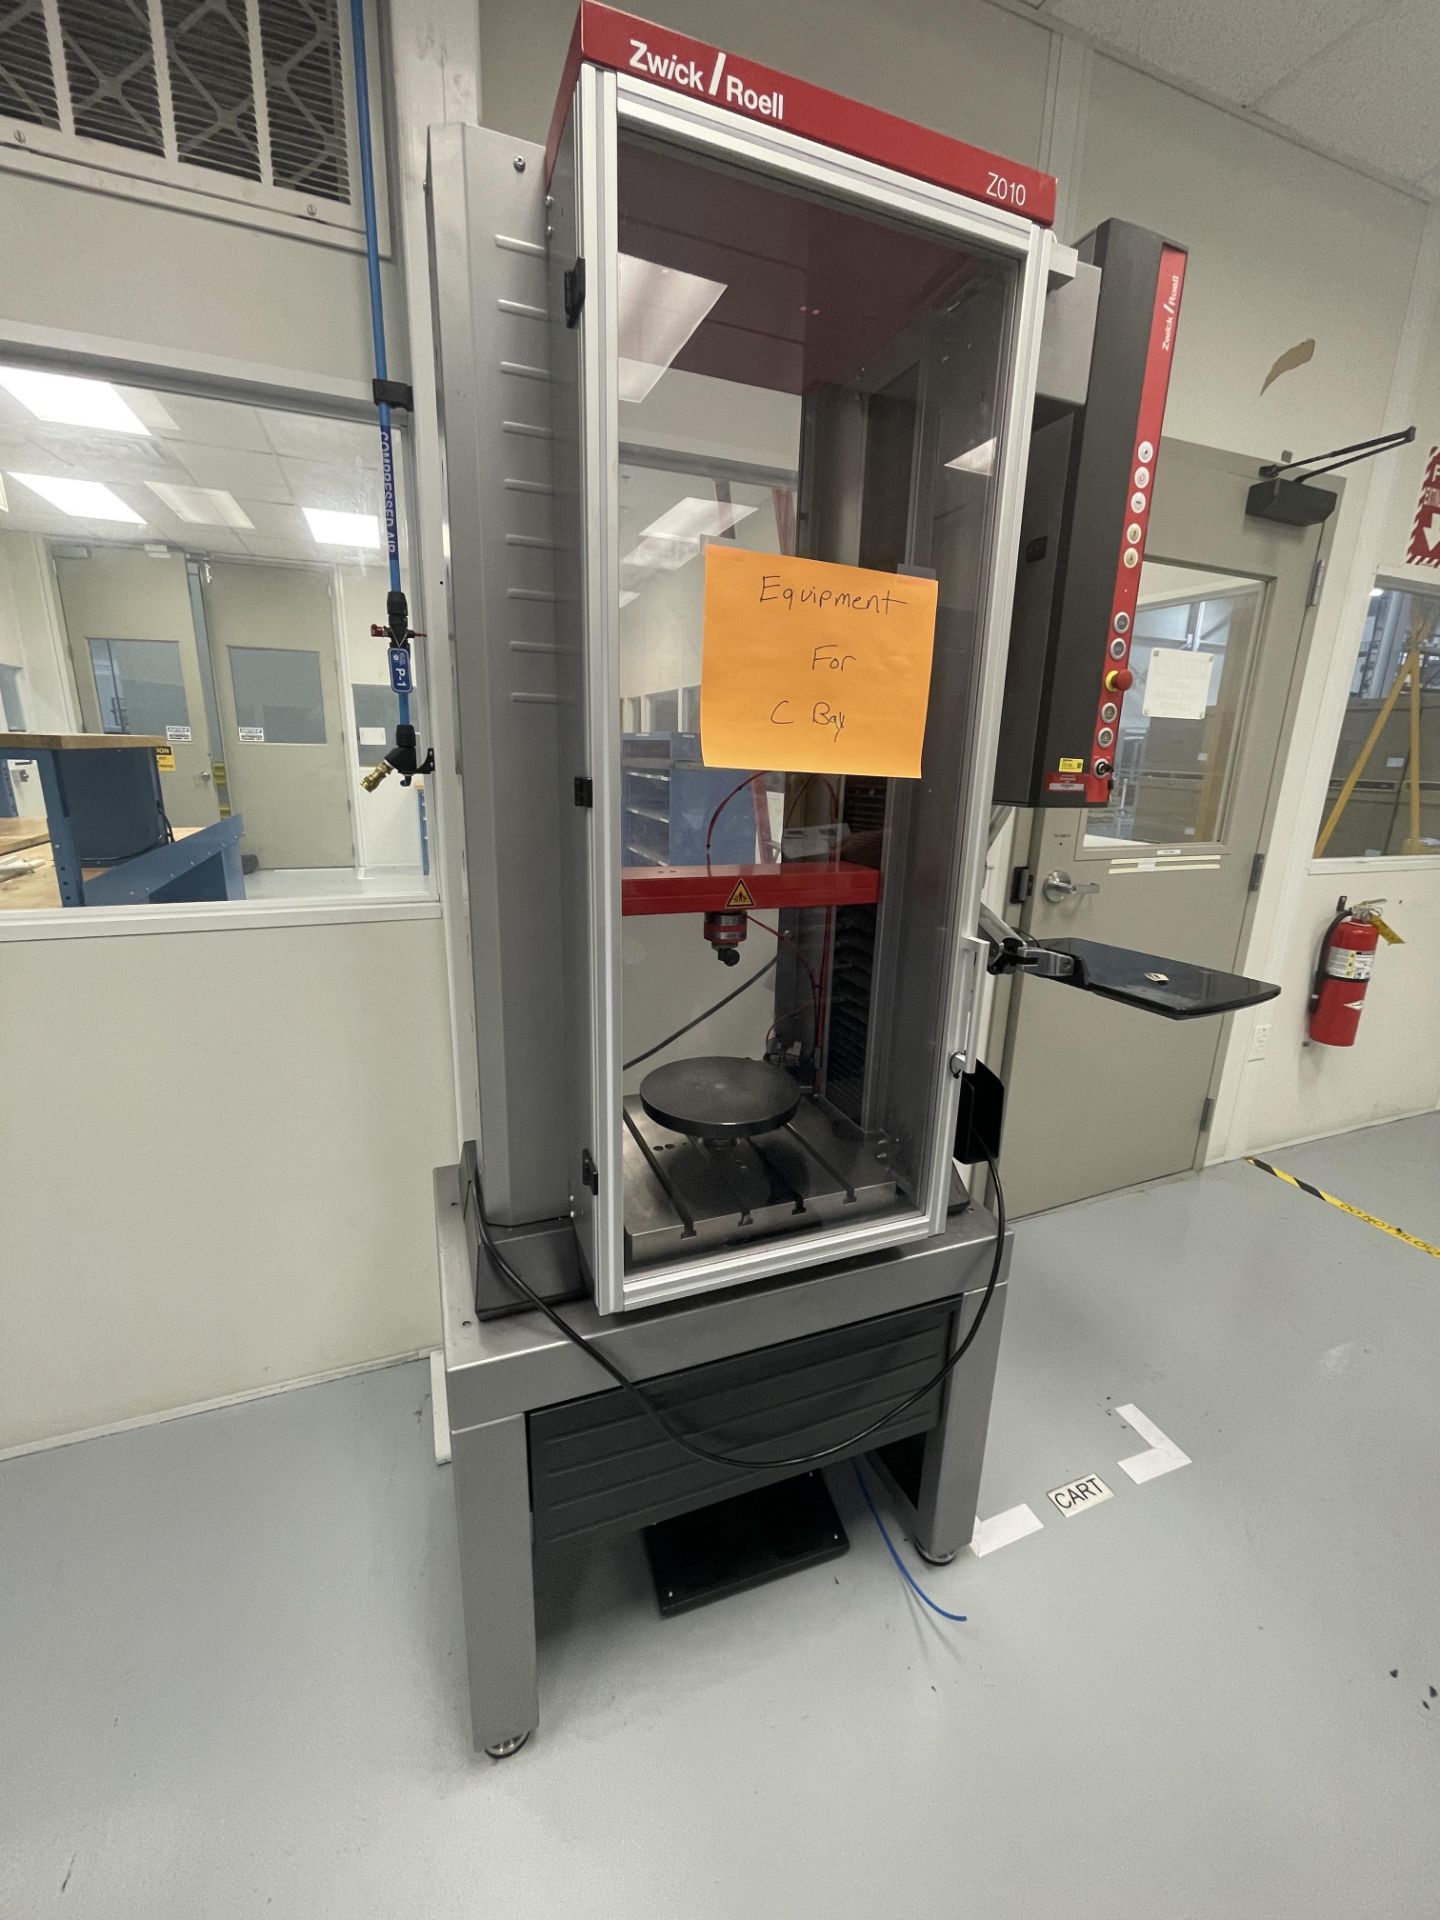 2019 Zwick/Roell Model Z010, Universal Test Machine for Molded Parts - Image 2 of 8